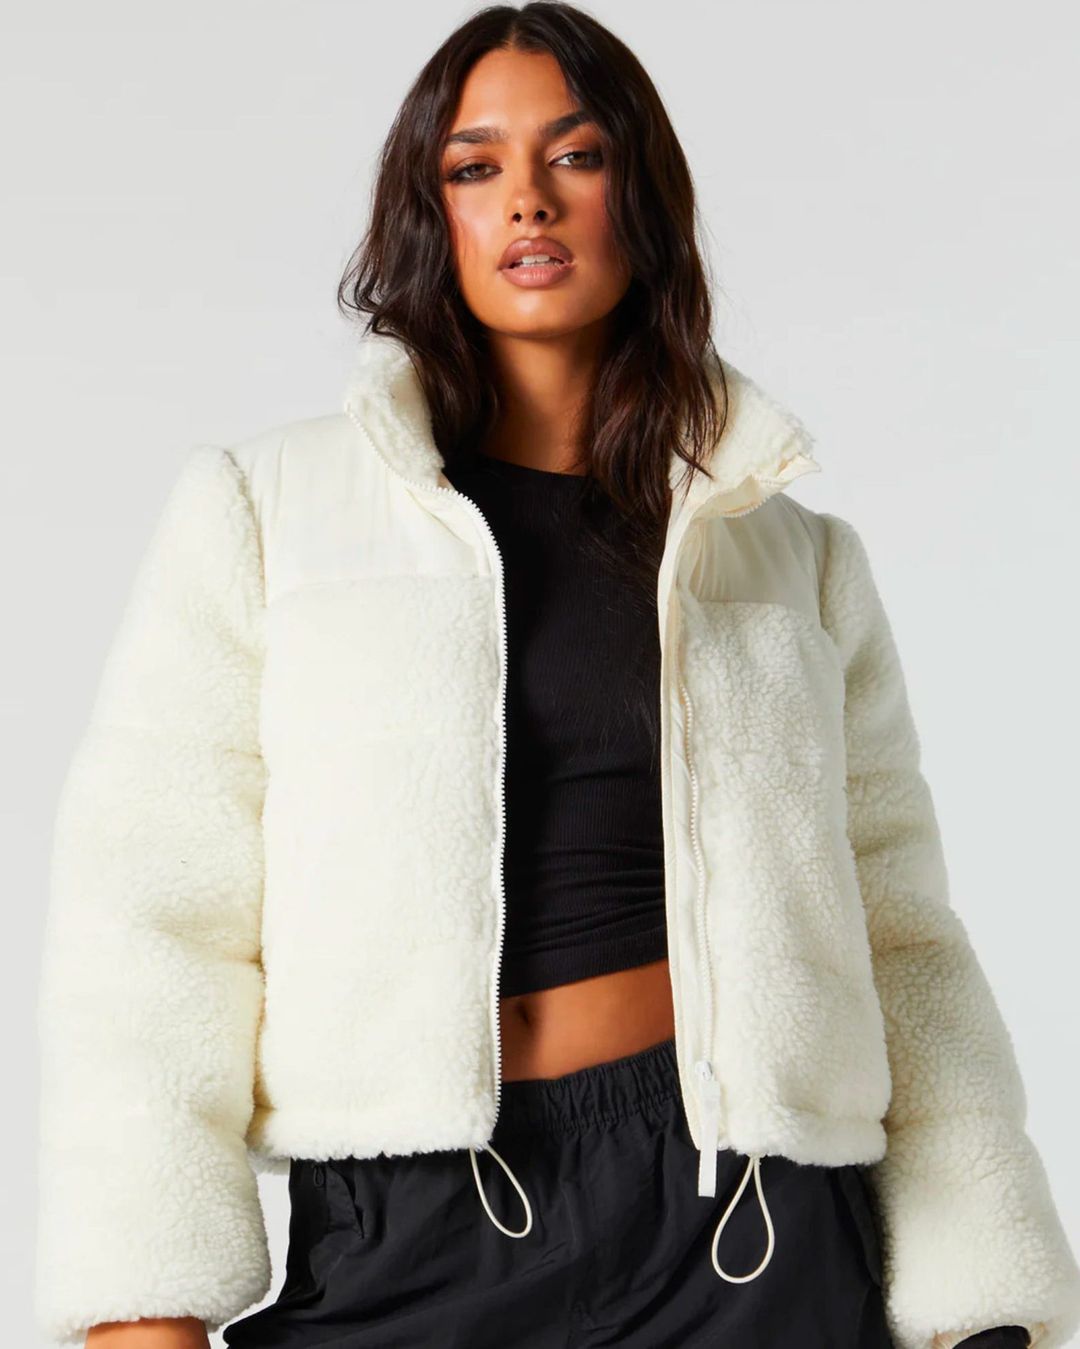 model wearing black crop top with white fuzzy jacket